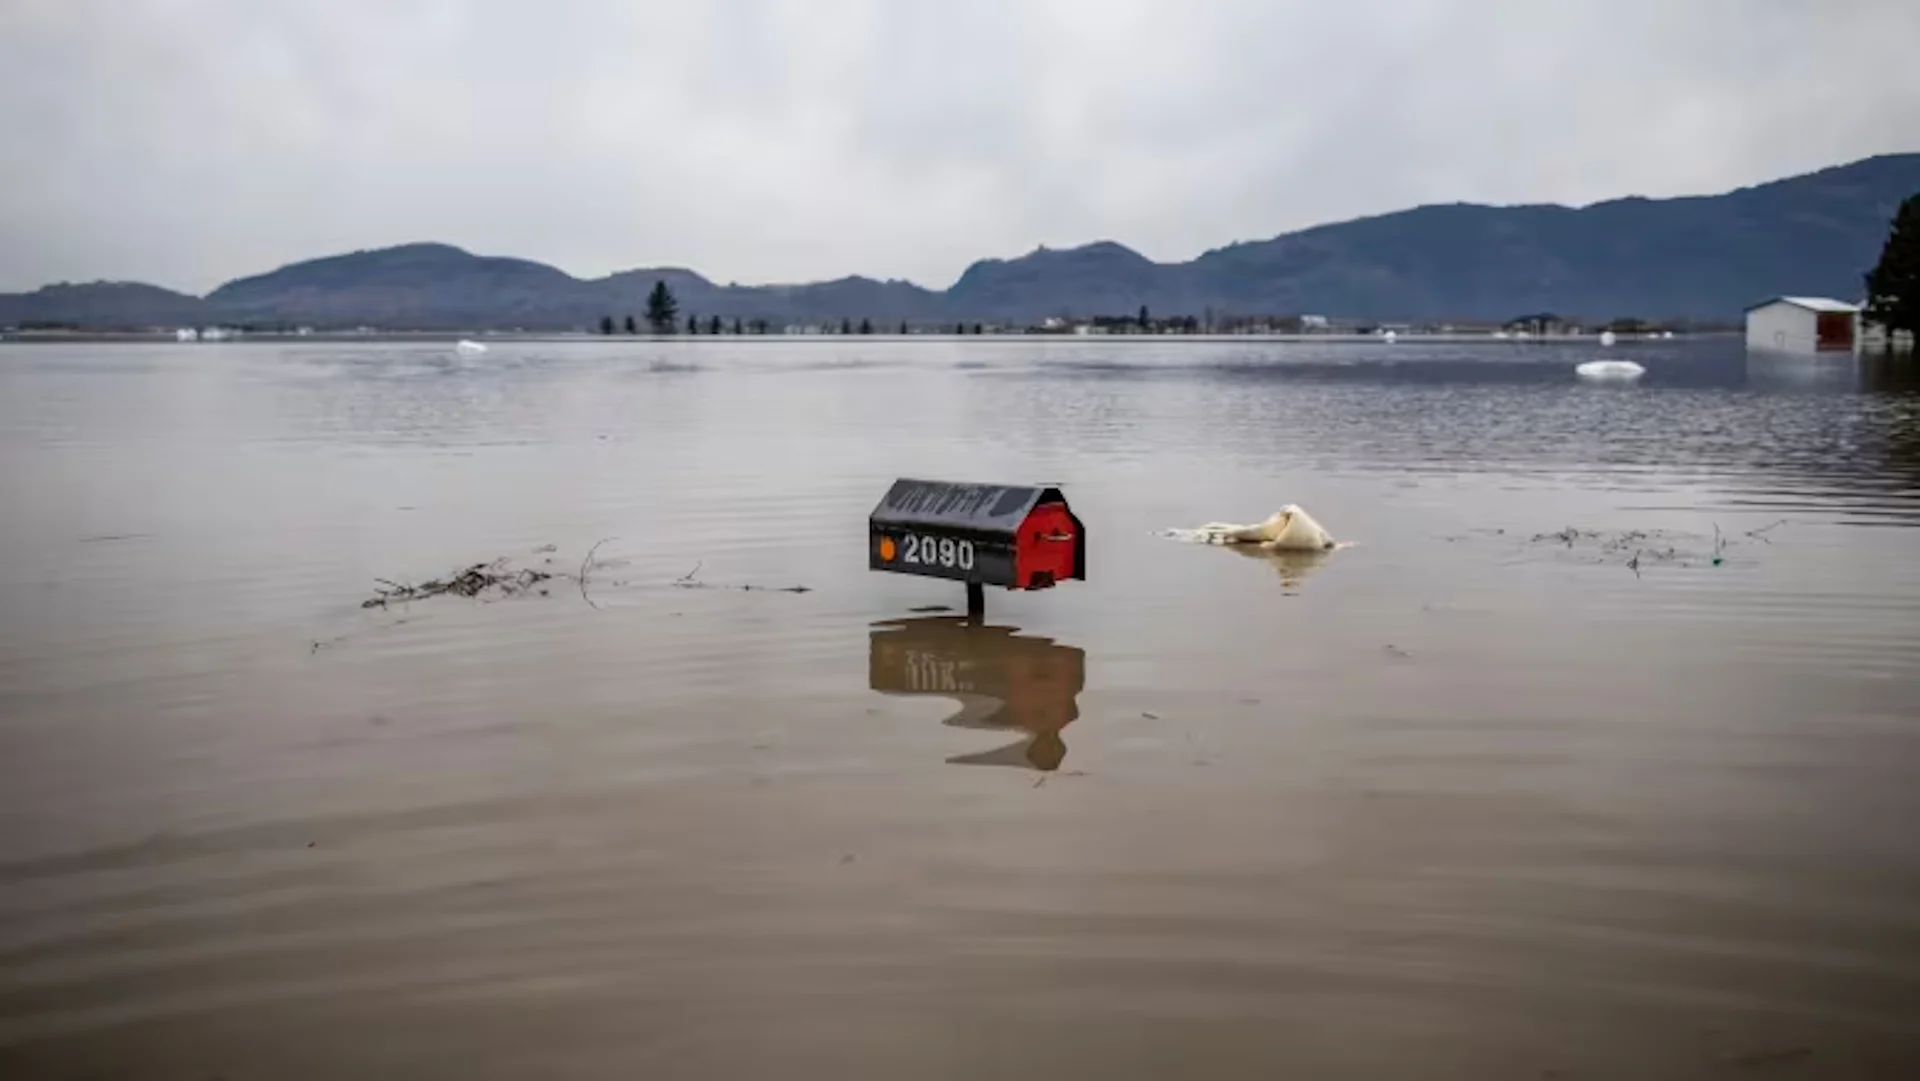 “The lake wants to come back” – some experts think reflooding this community in B.C. may prevent catastrophic floods in the future